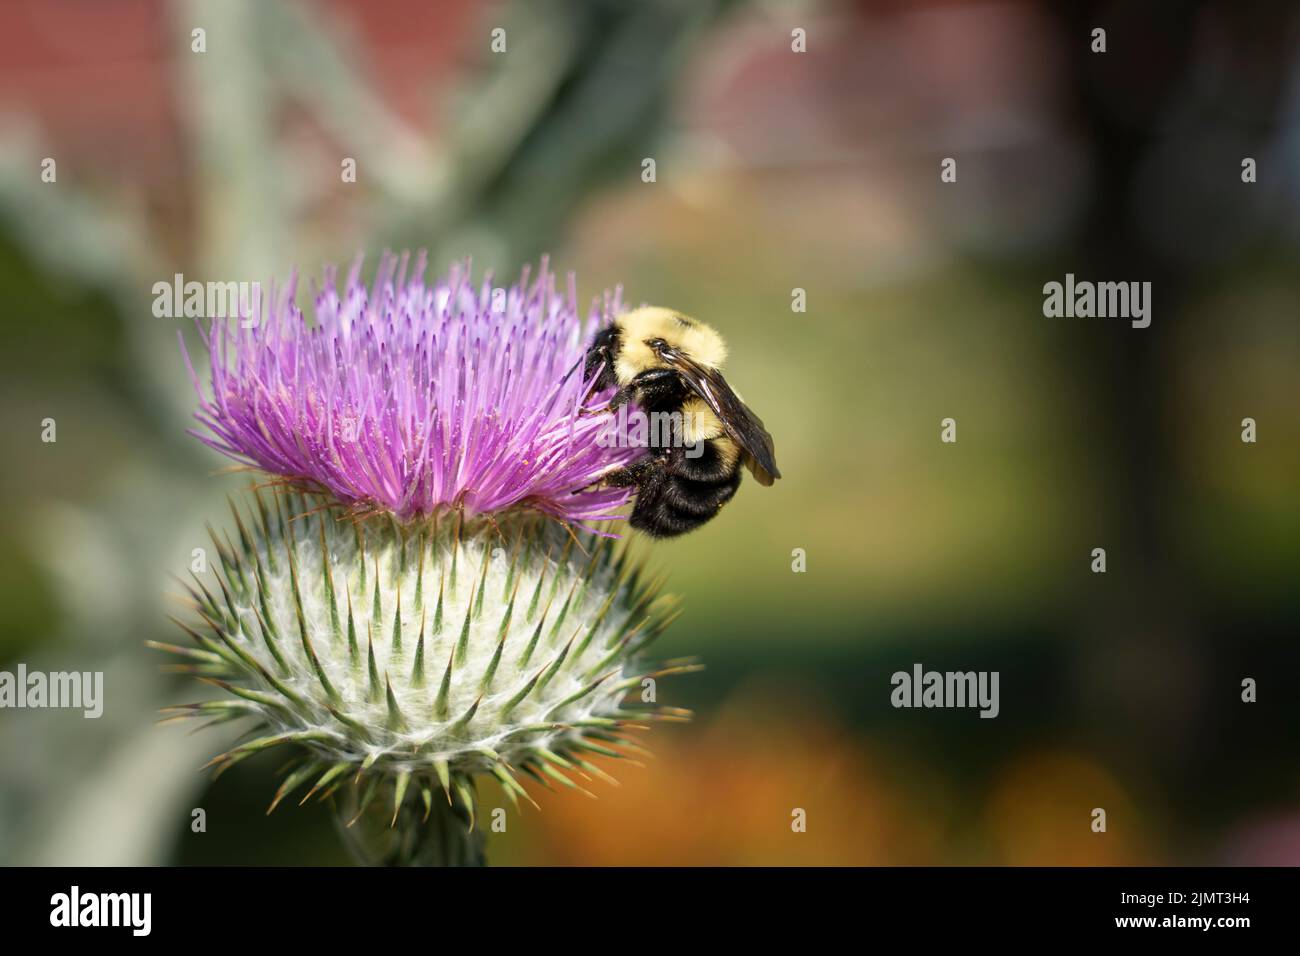 Close-up of a bumble bee pollinating a beautiful blooming cotton thistle flower Stock Photo